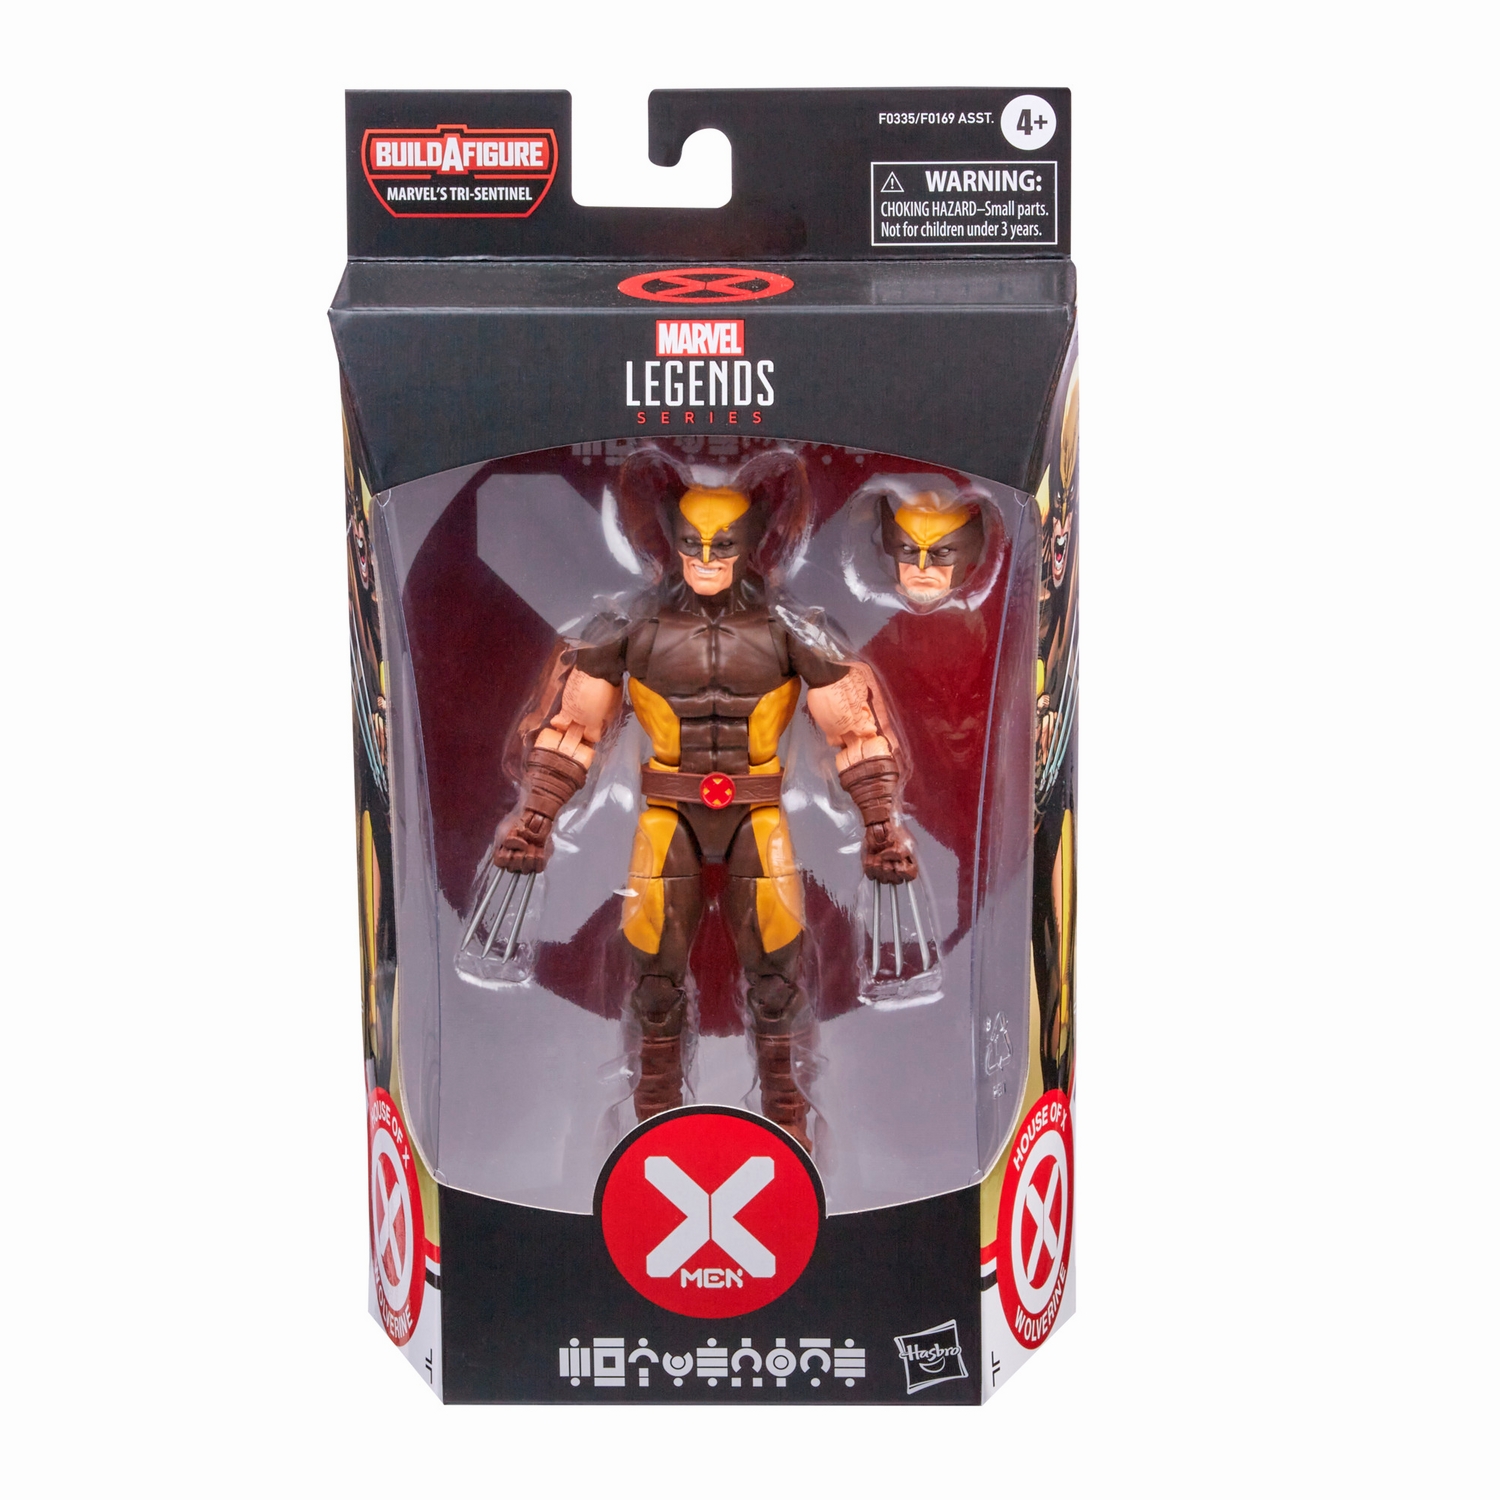 MARVEL LEGENDS SERIES 6-INCH X-MEN HOUSE OF X POWERS OF X Figure Assortment - Wolverine (in pck).jpg